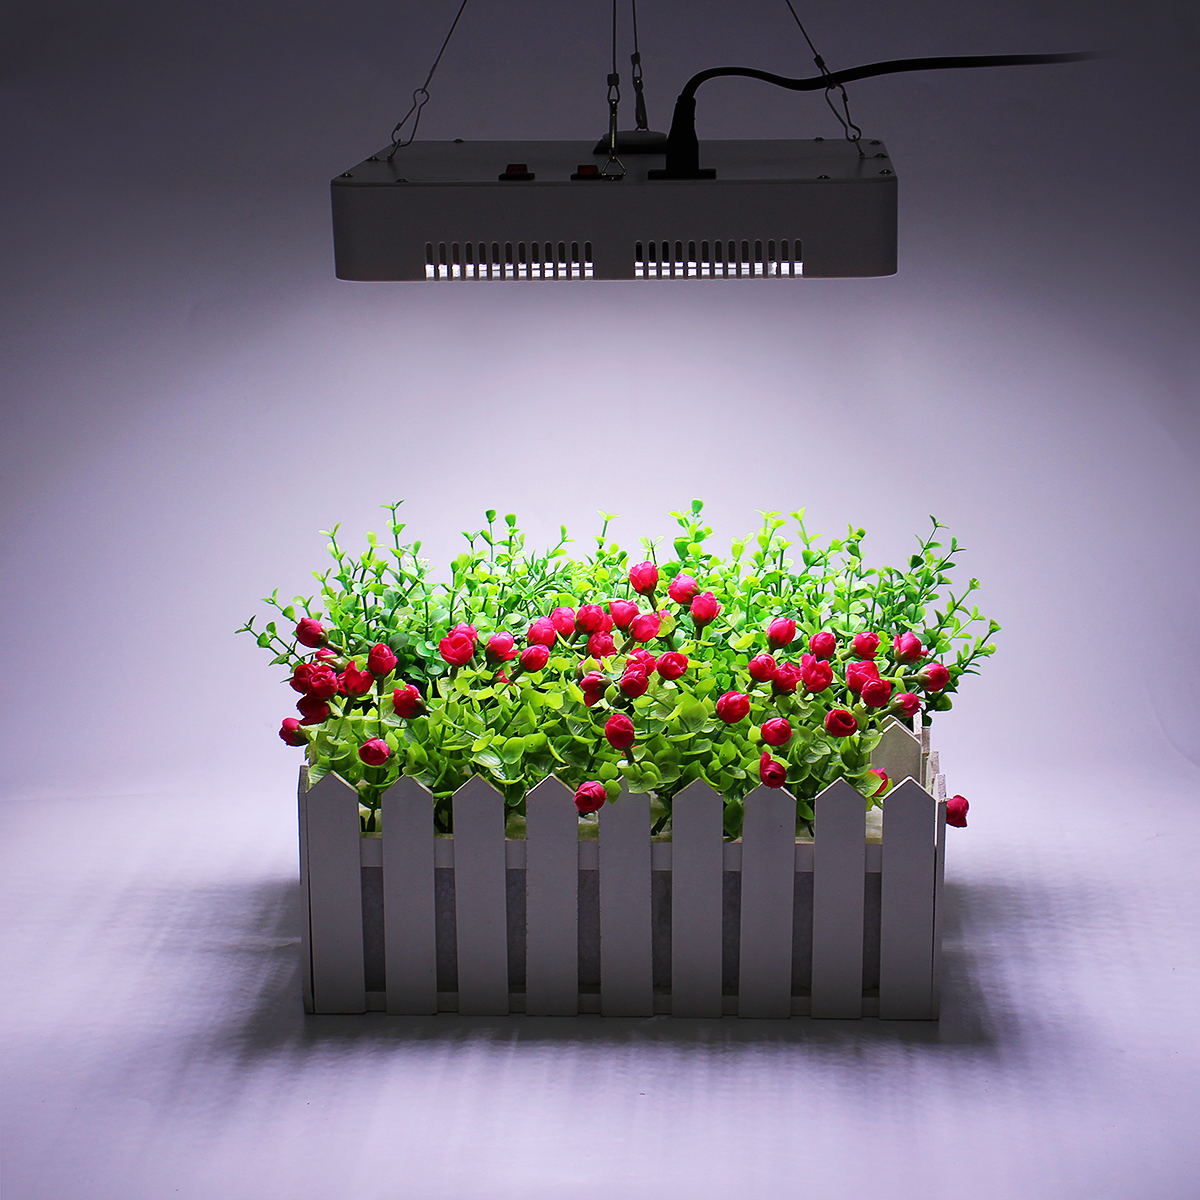 50W-85-260V-240LED-Plant-Grow-Lamp-Sunlight-Full-Spectrum-Dual-Switch-Hydroponic-Growth-Lamp-1805696-10